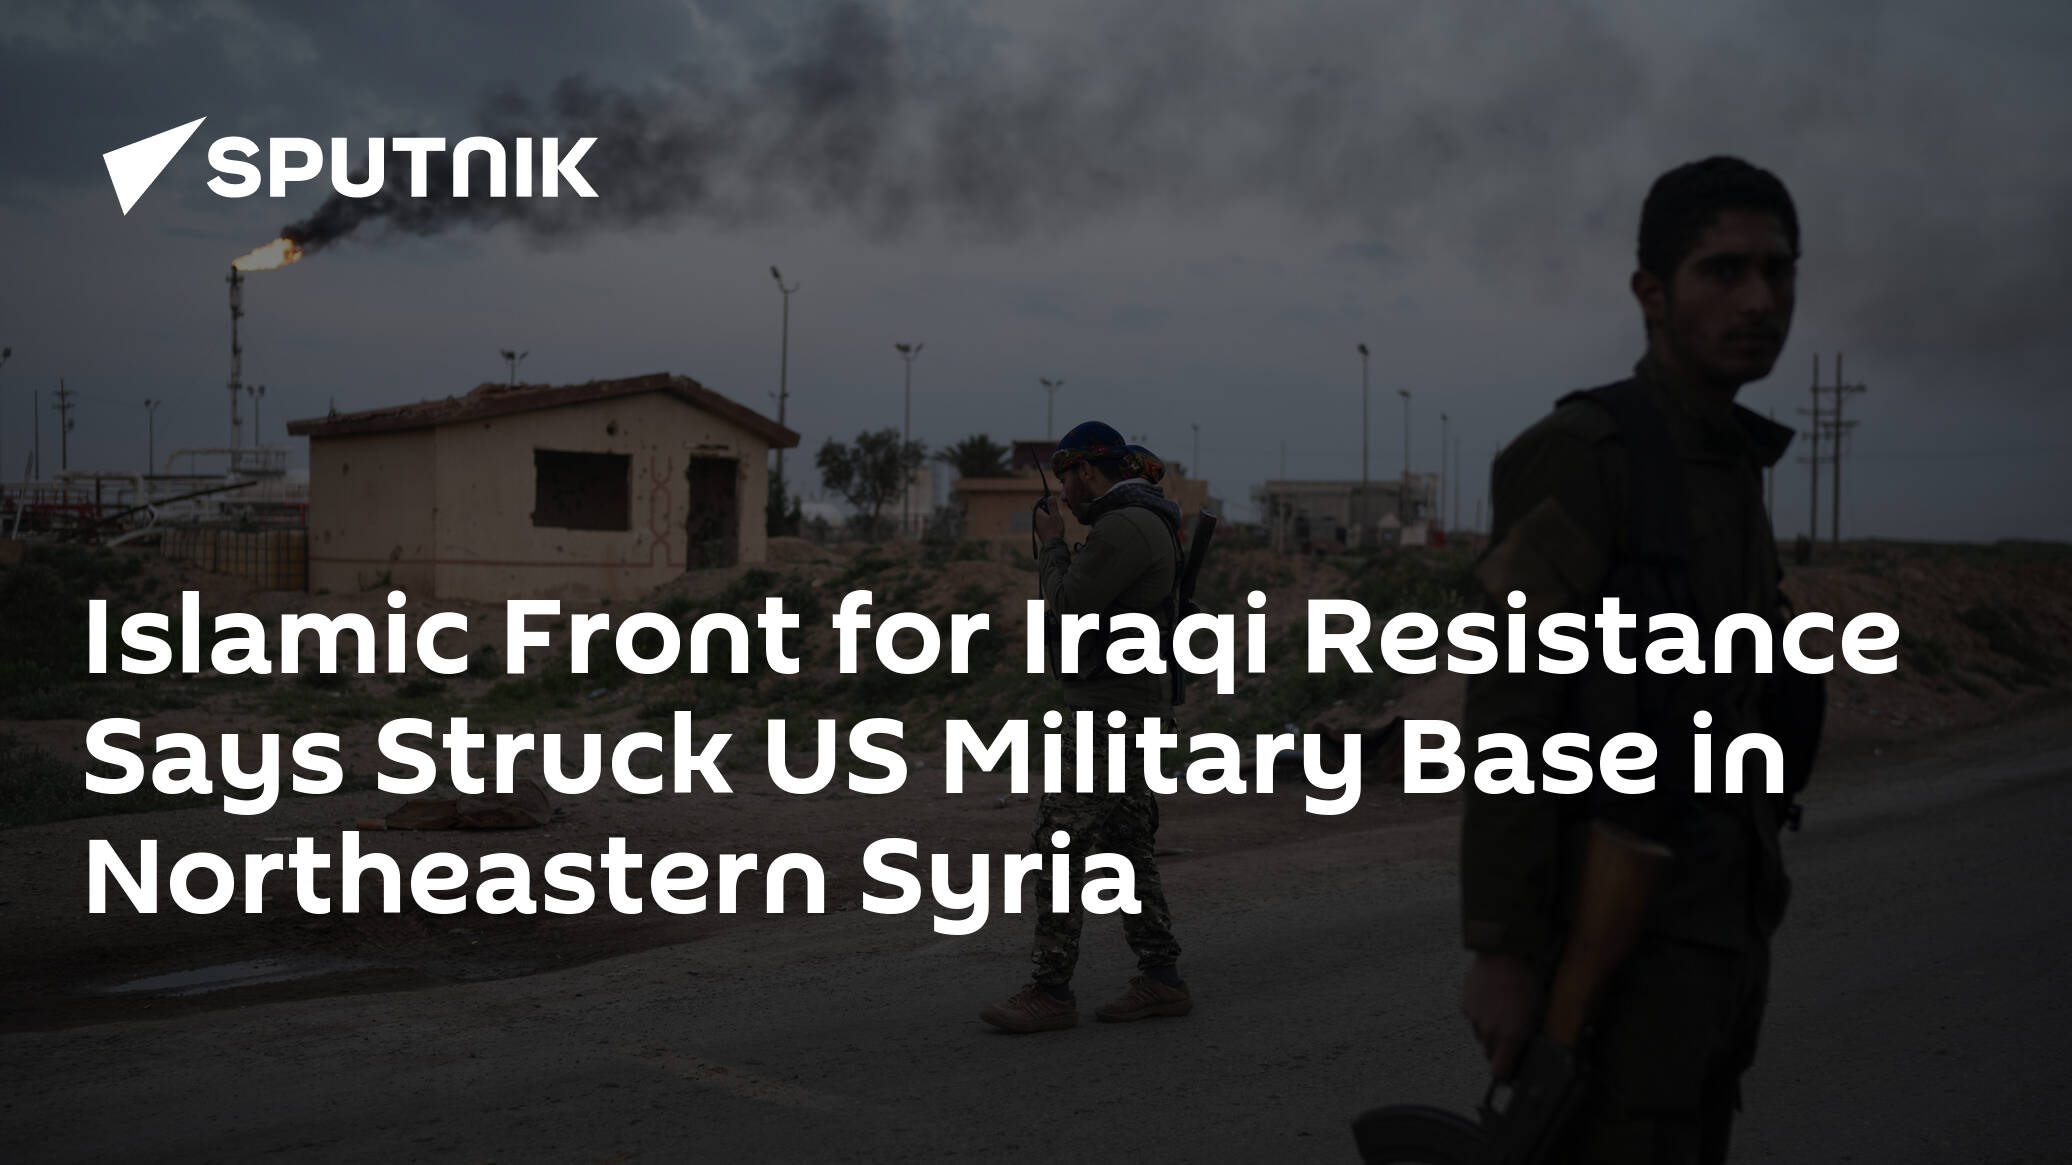 Islamic Front for Iraqi Resistance Says Struck US Military Base in Northeastern Syria